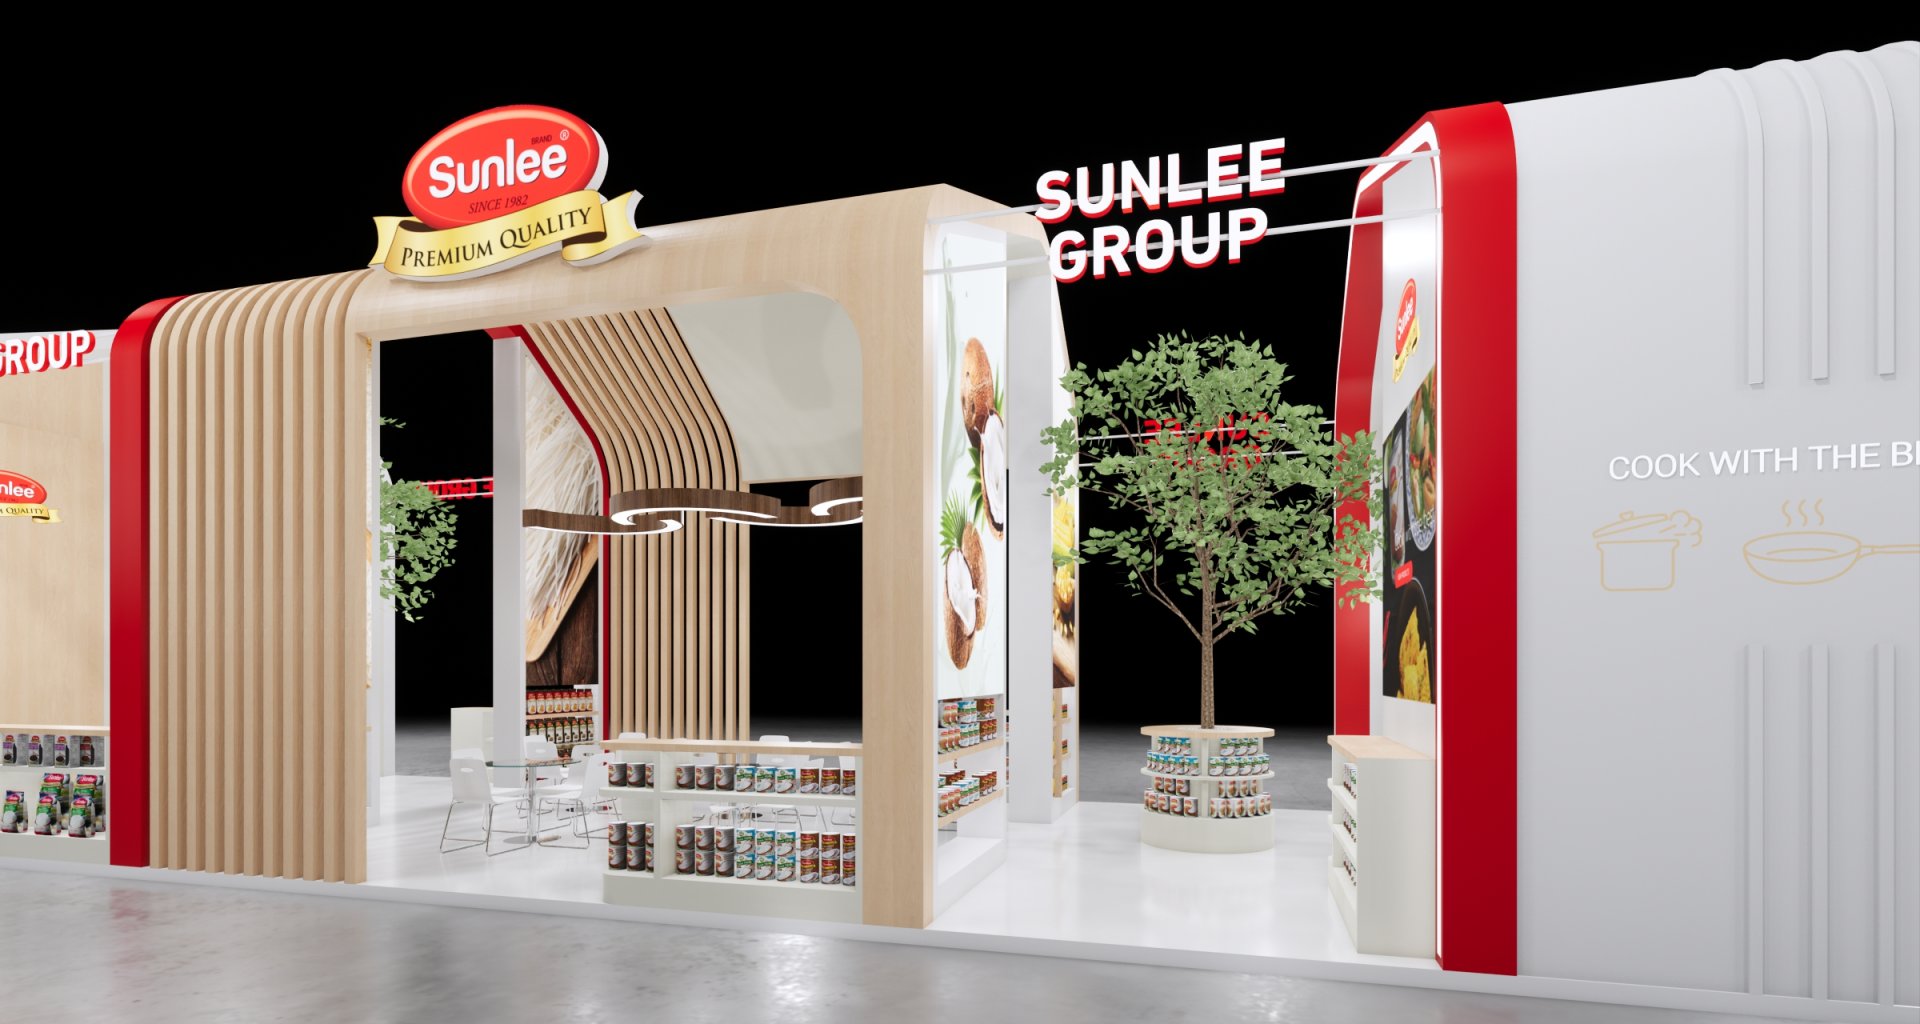 SUNLEE GROUP